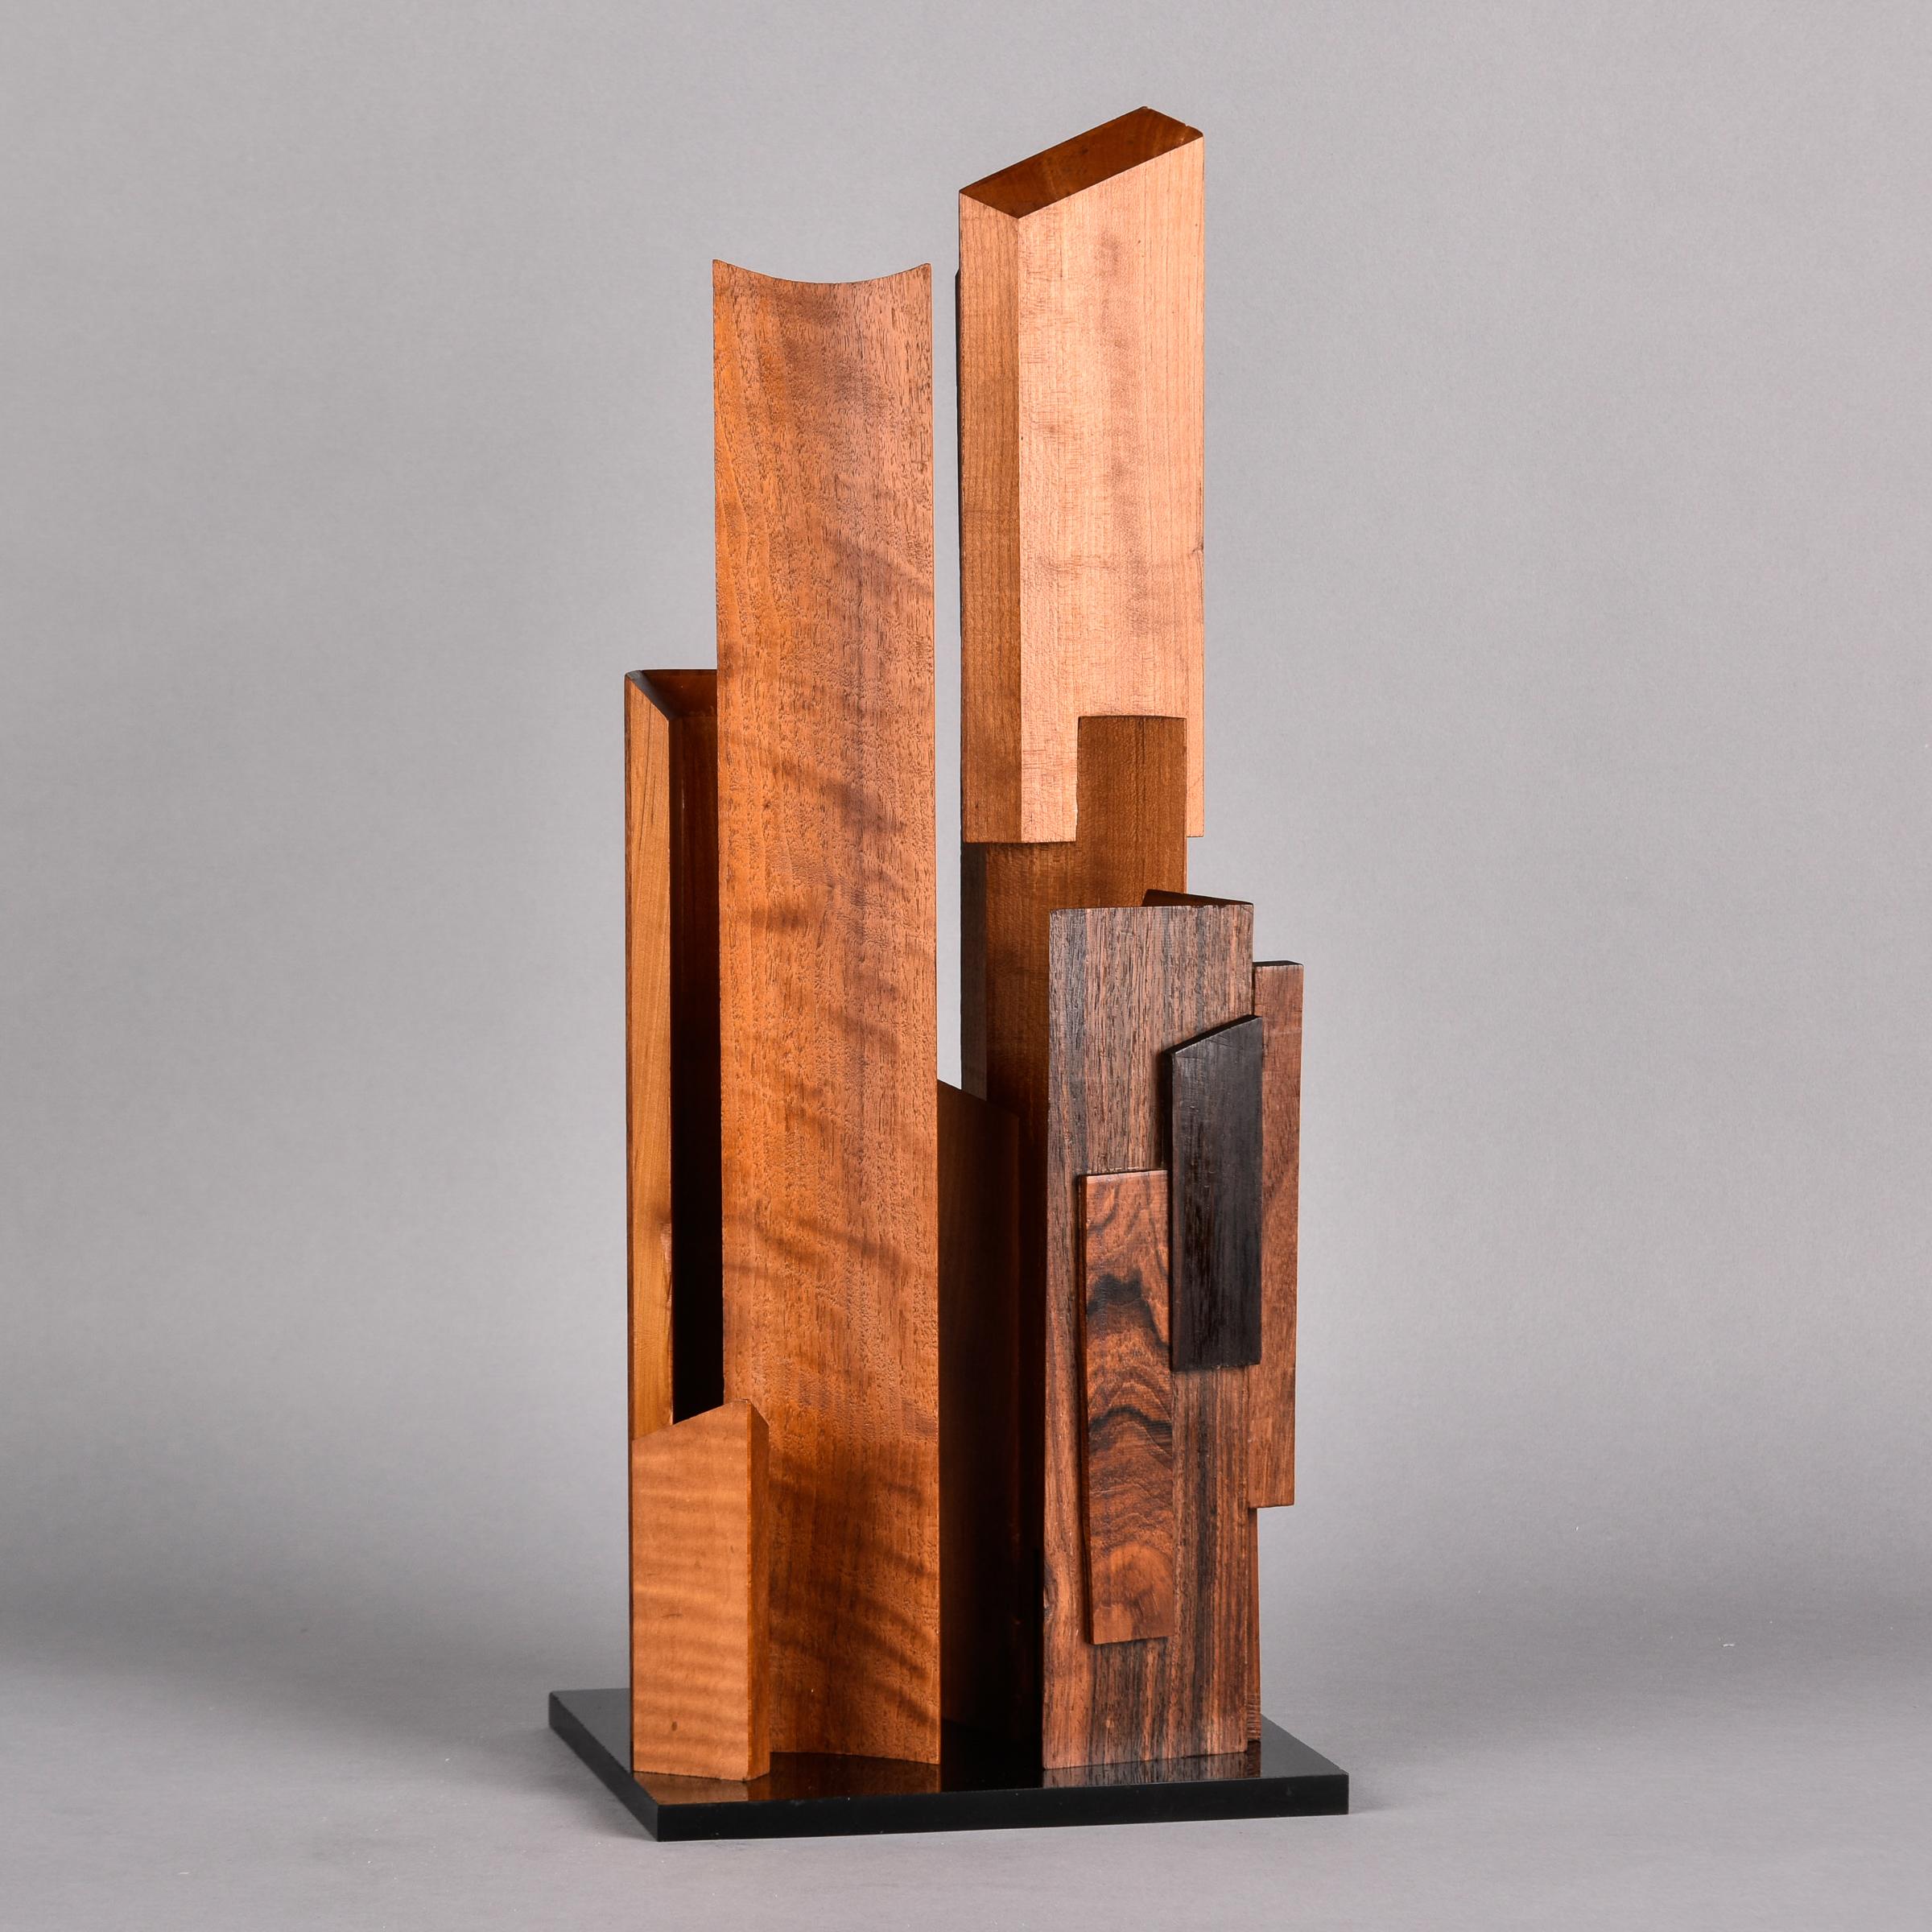 Found in the US, this abstract wood sculpture is attributed to Vermont artist Gibb Taylor and dates from the late 1960s. This table top sculpture is just under two feet tall and consists of upright polished wood pieces of walnut and rosewood and